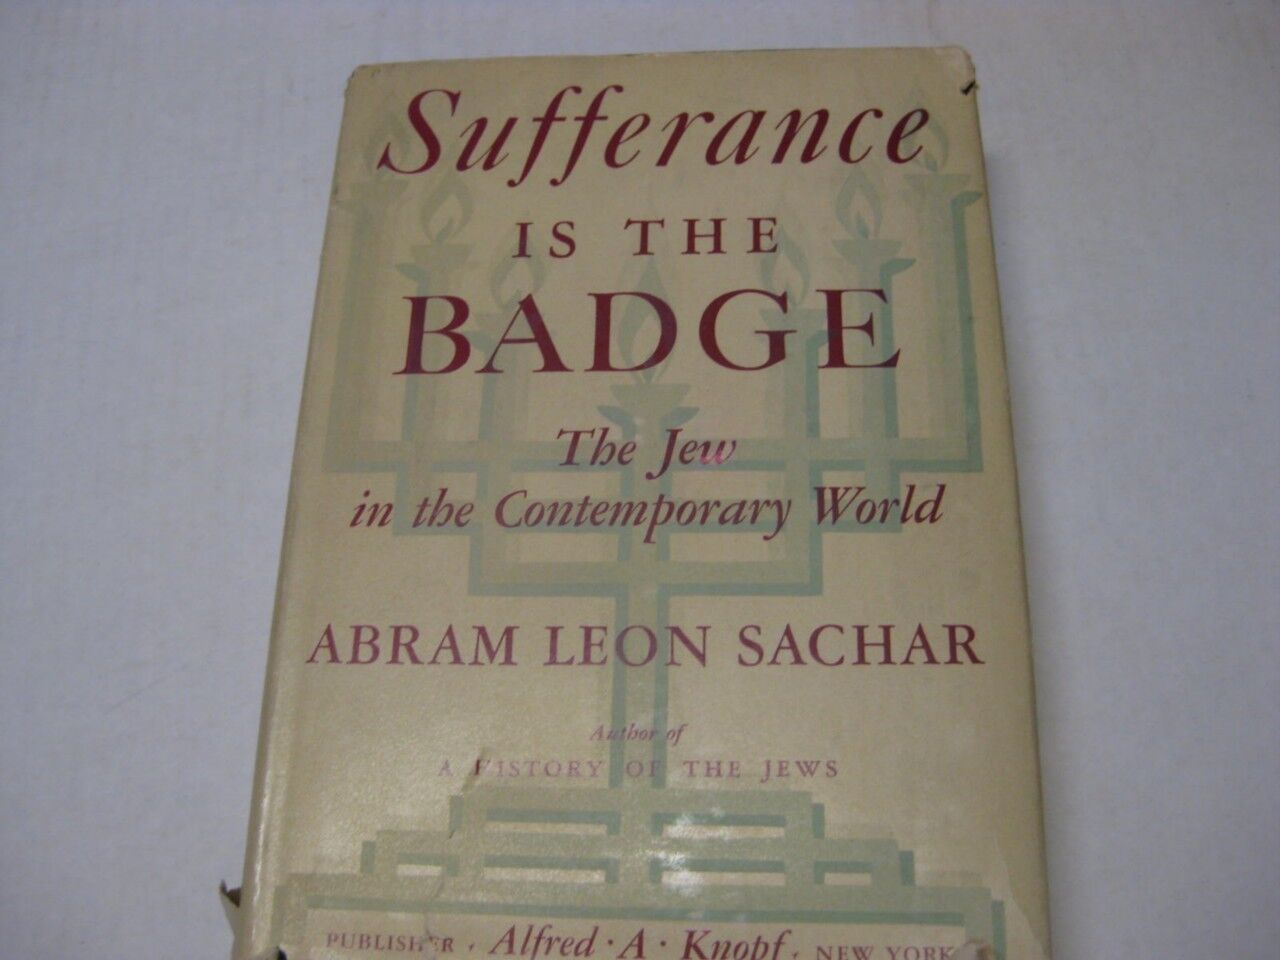 Sufferance is the Badge: The Jew in the Contemporary World by Abram Leon Sachar